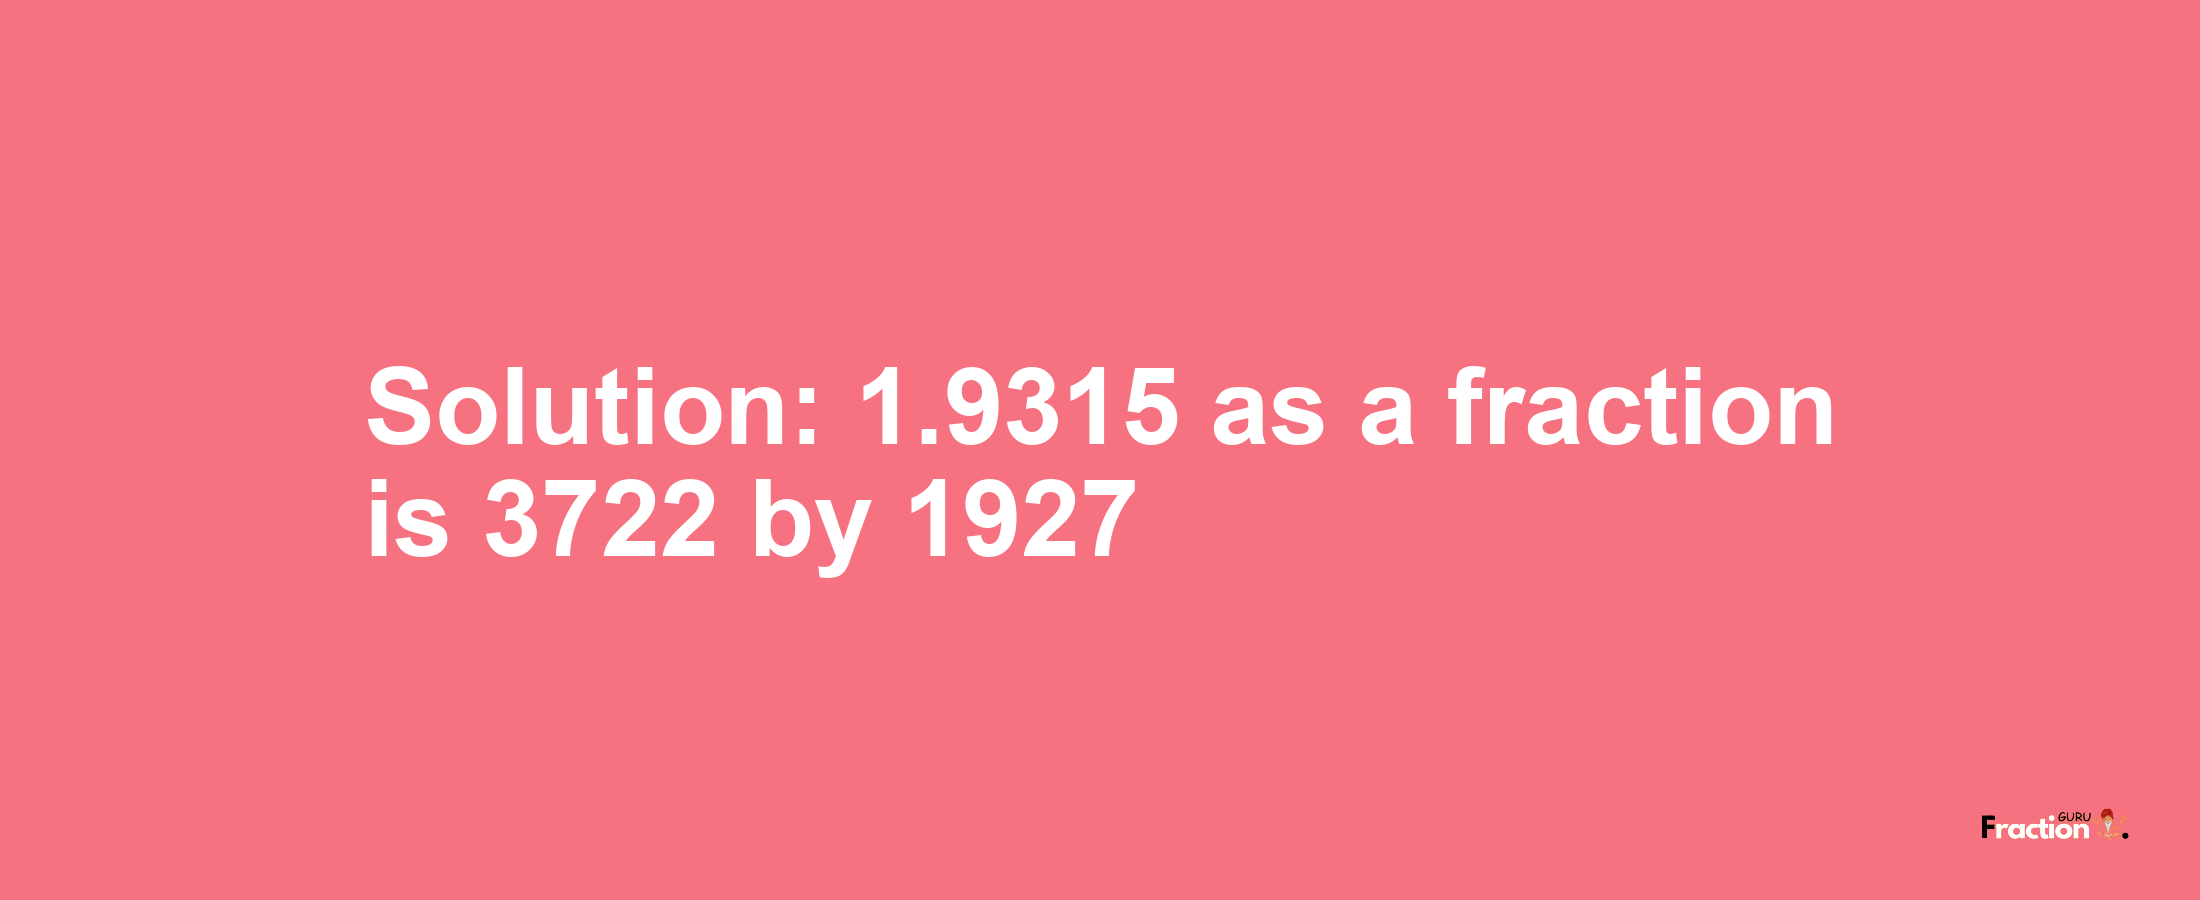 Solution:1.9315 as a fraction is 3722/1927